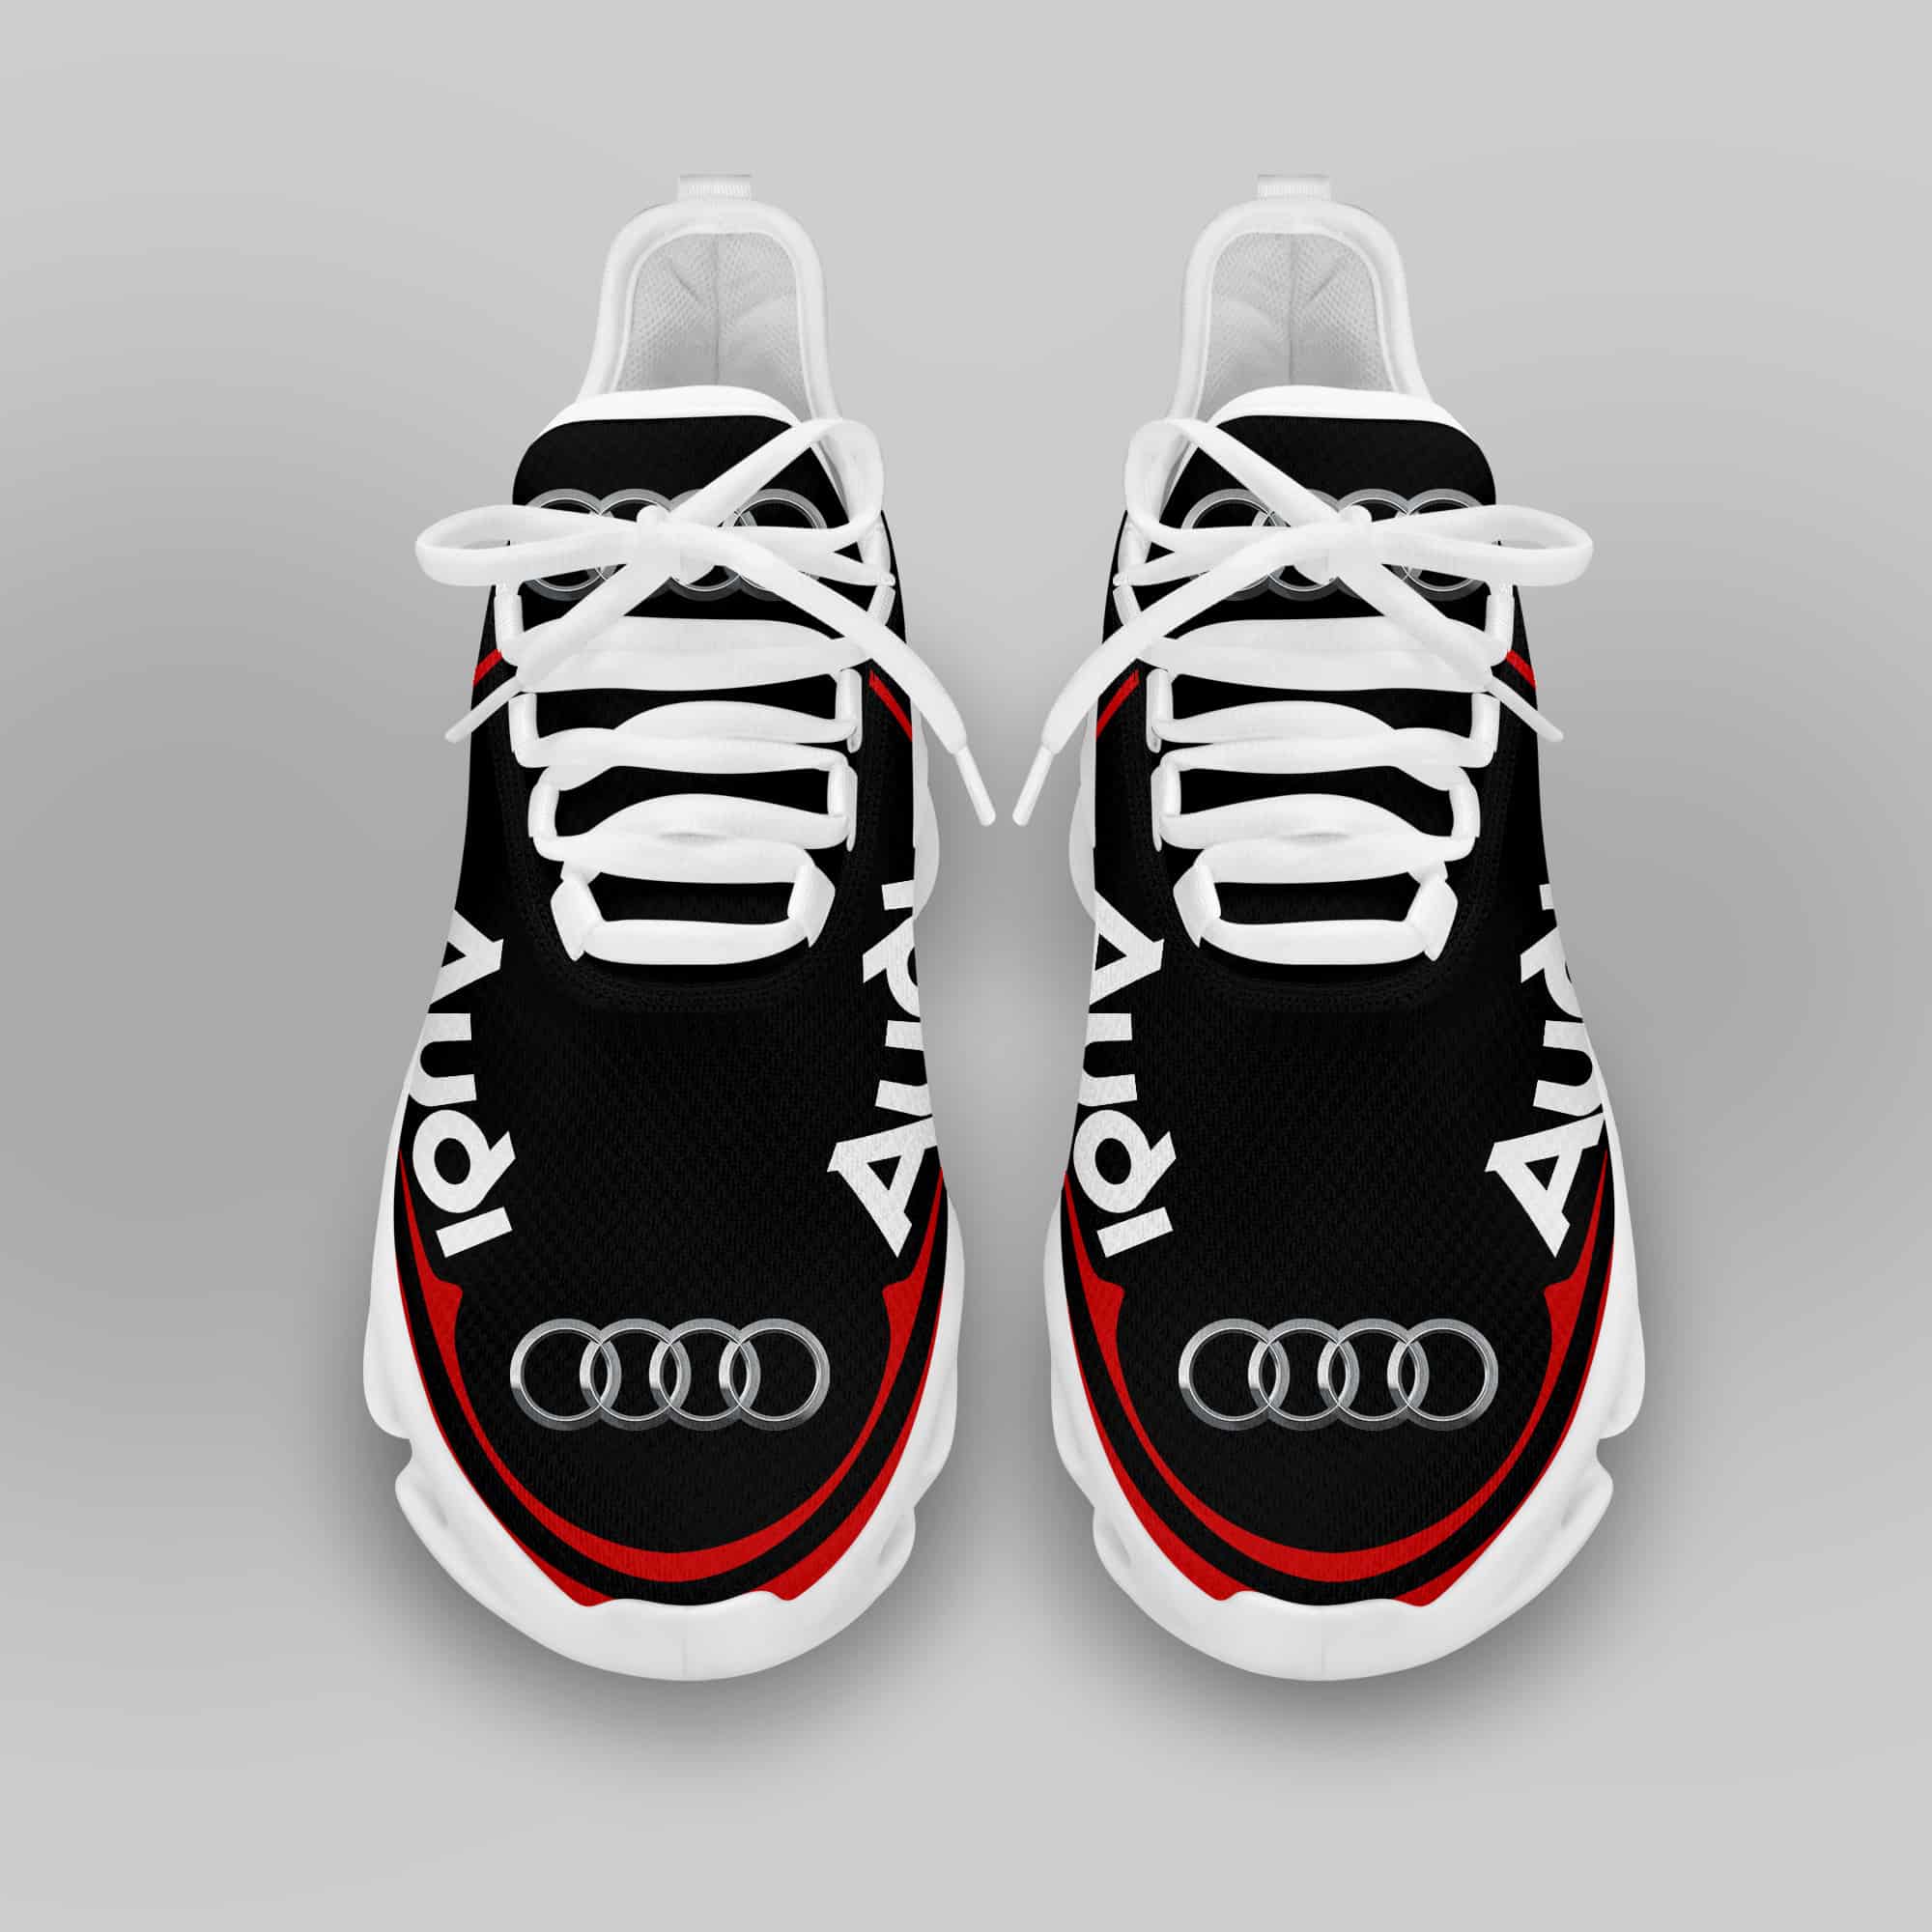 Audi Sport Running Shoes Max Soul Shoes Sneakers Ver 43 3